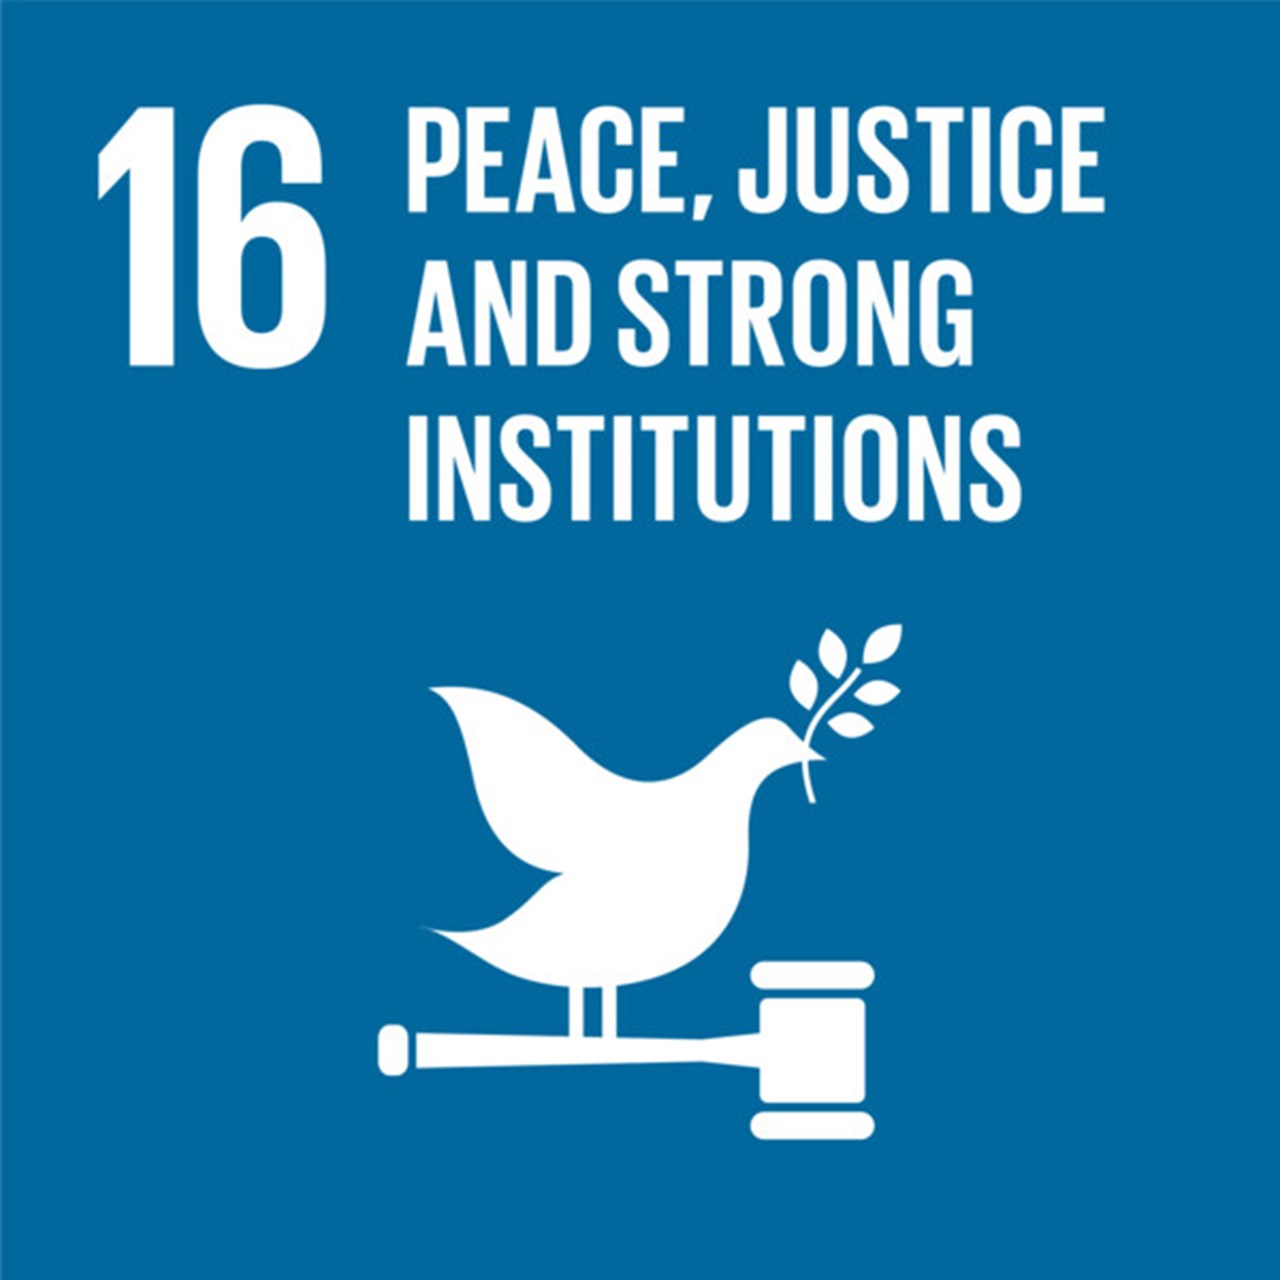 The Global Goals, Goal 16 - Peace, Justice and Strong Institutions